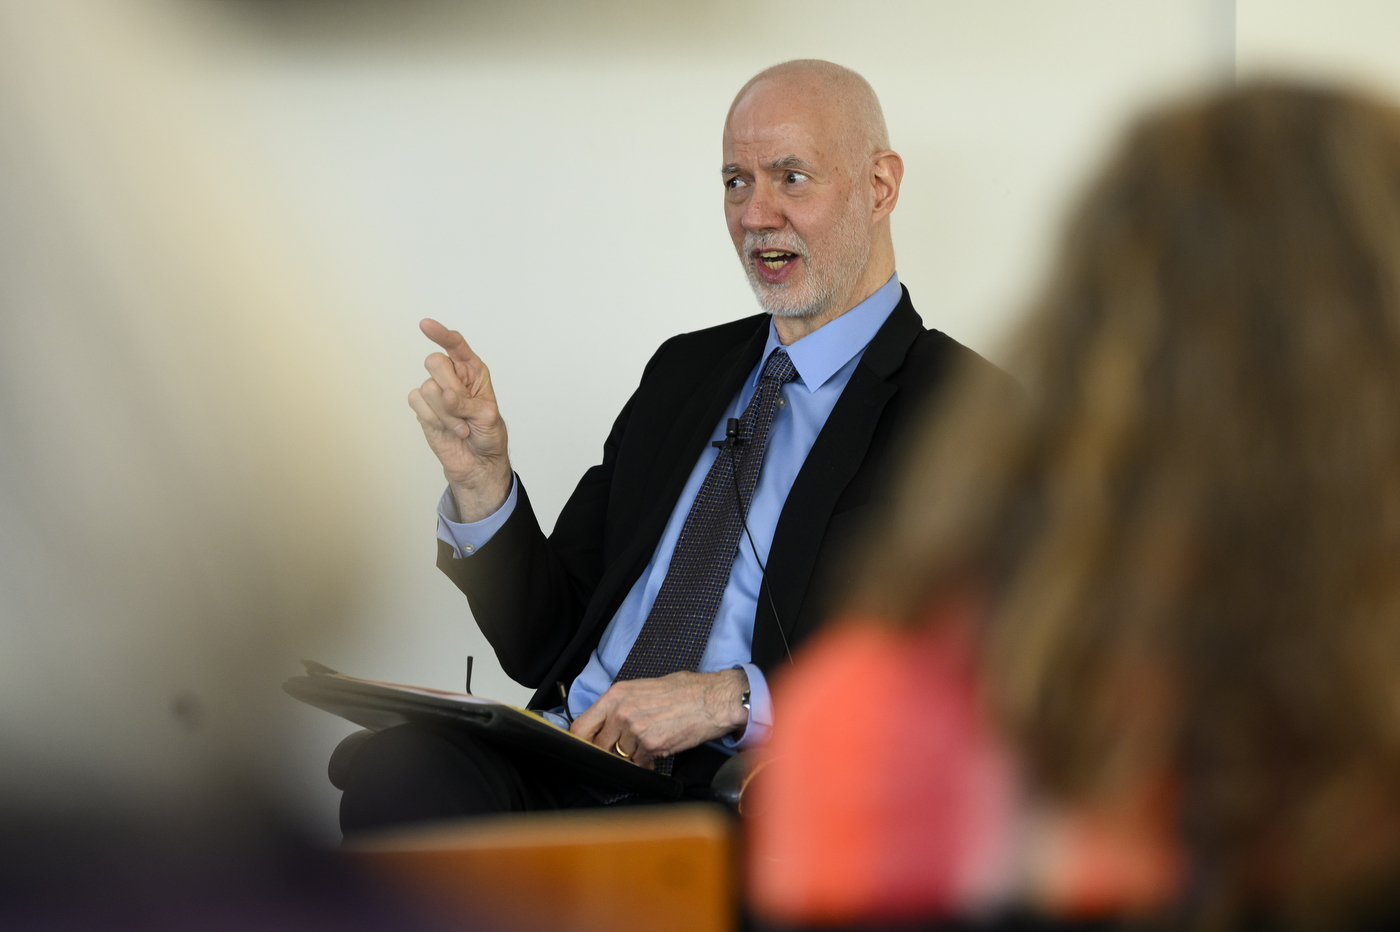 professor nick burbules gestures while speaking at the fireside chat